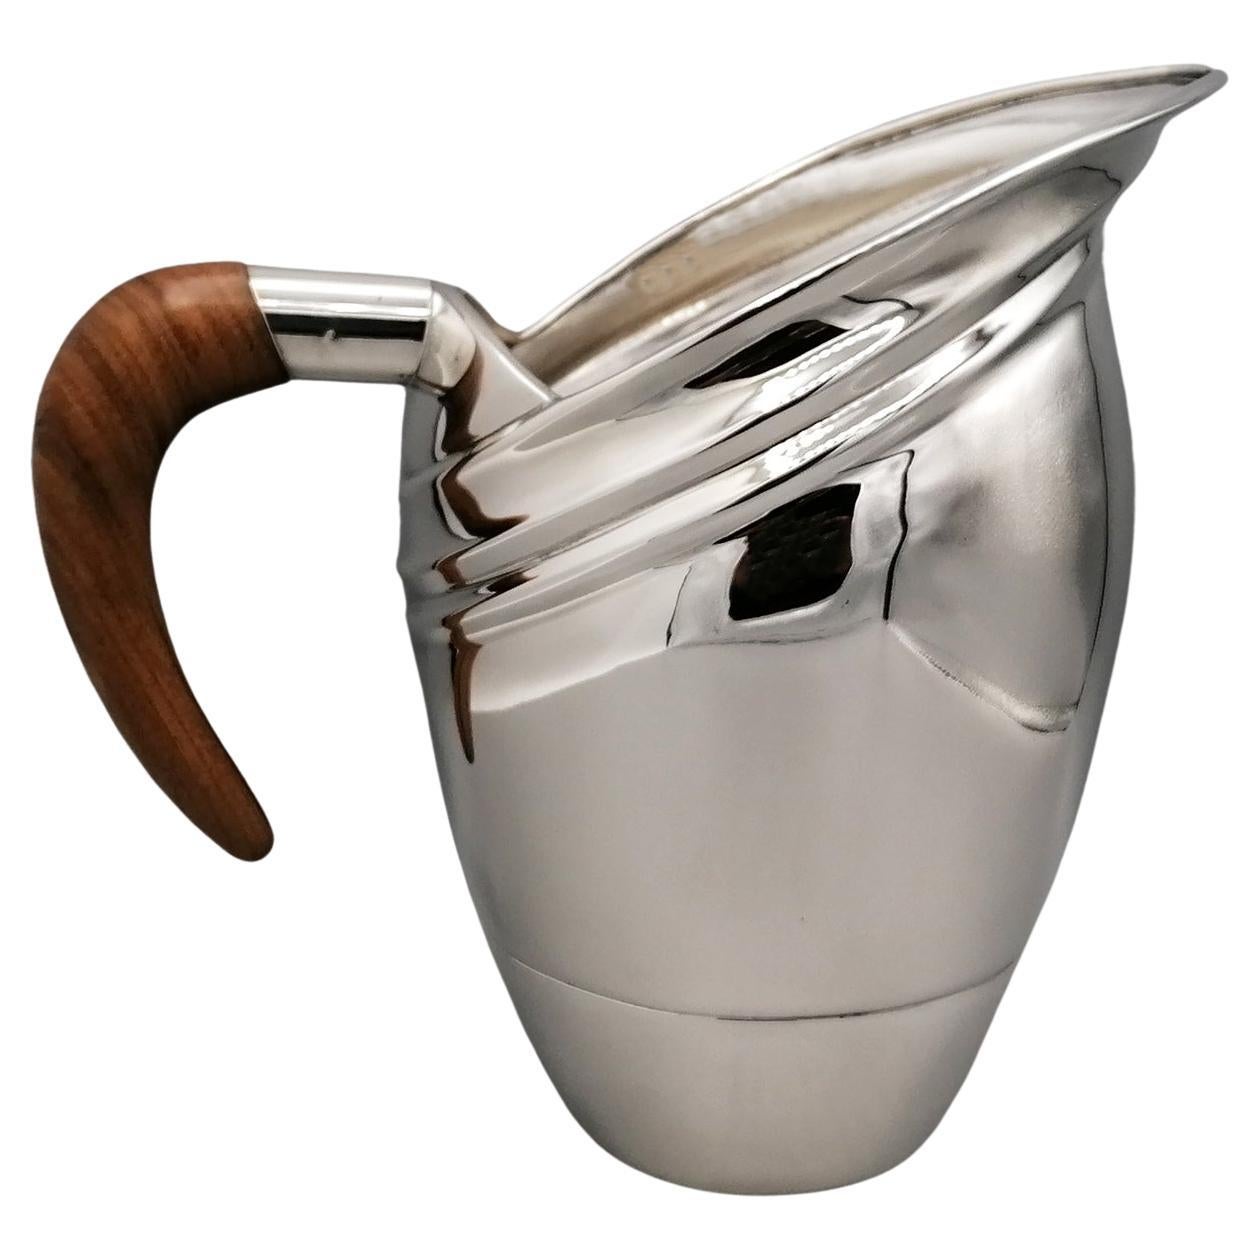 21st Century Italian Art Deco style Sterling Silver Water jug with wood handle